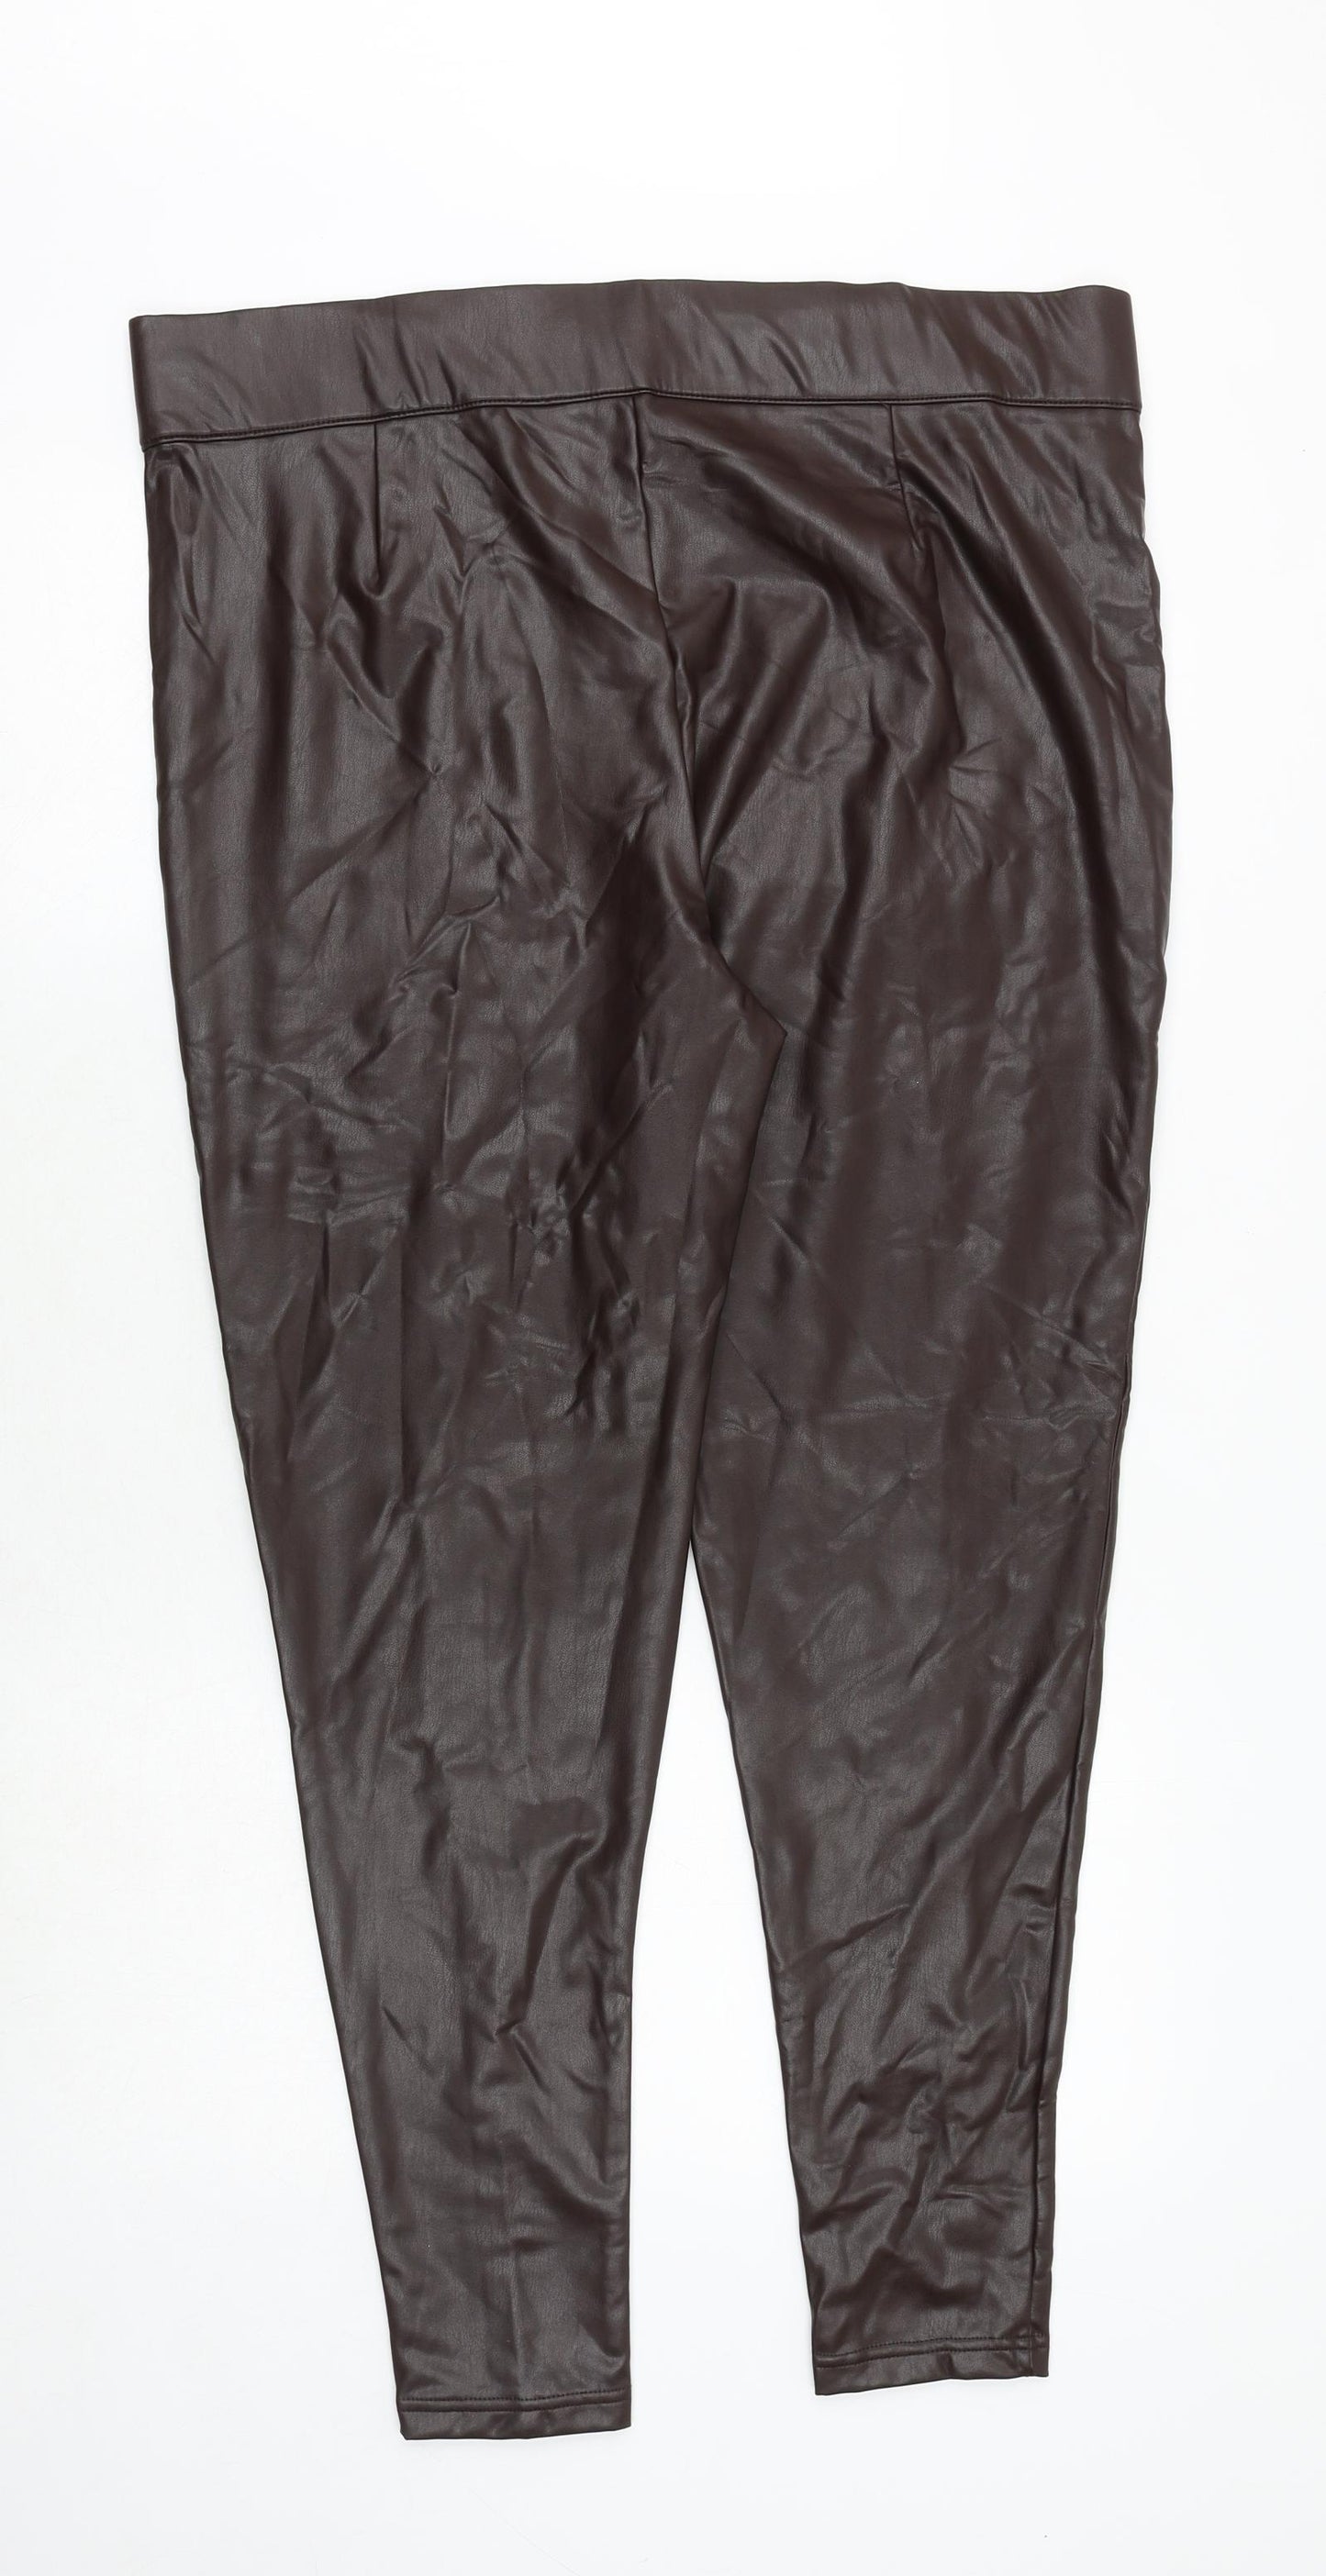 Marks and Spencer Womens Brown Polyurethane Dress Pants Trousers Size 20 Regular